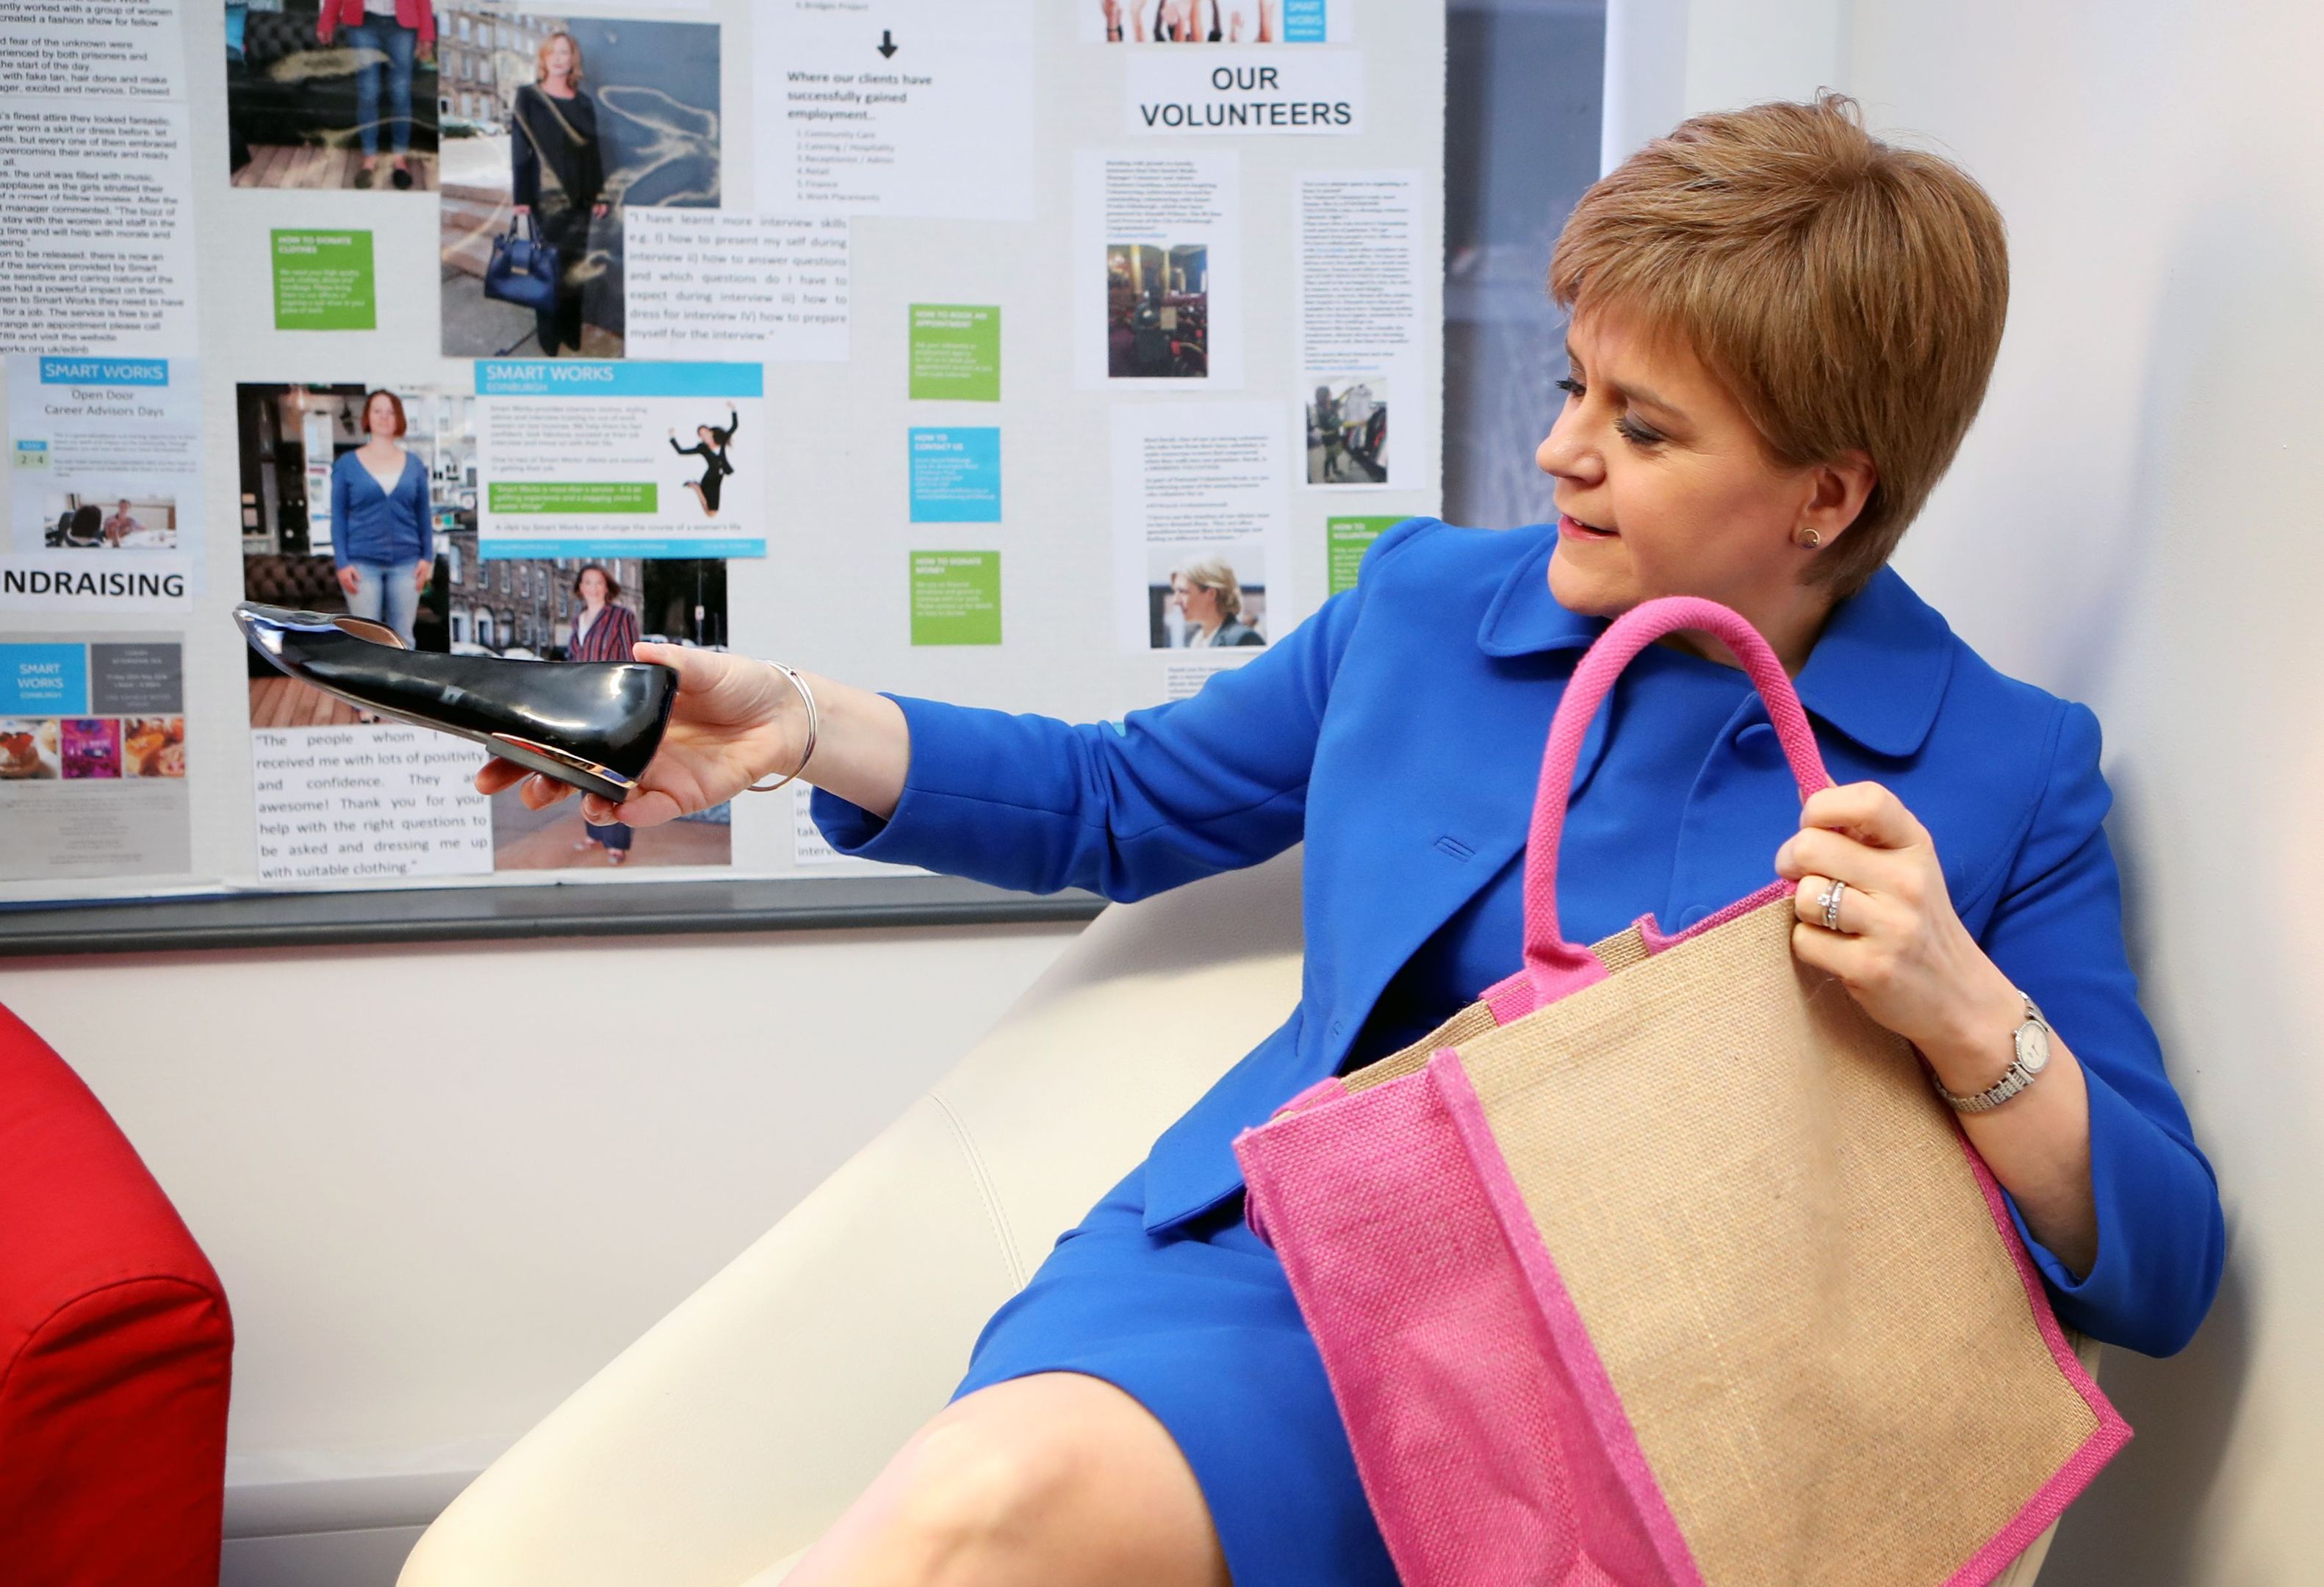 First Minister Nicola Sturgeon donates a pair of shoes to Smart Works in Edinburgh during an event to mark International Women’s Day. (Jane Barlow/PA Wire)